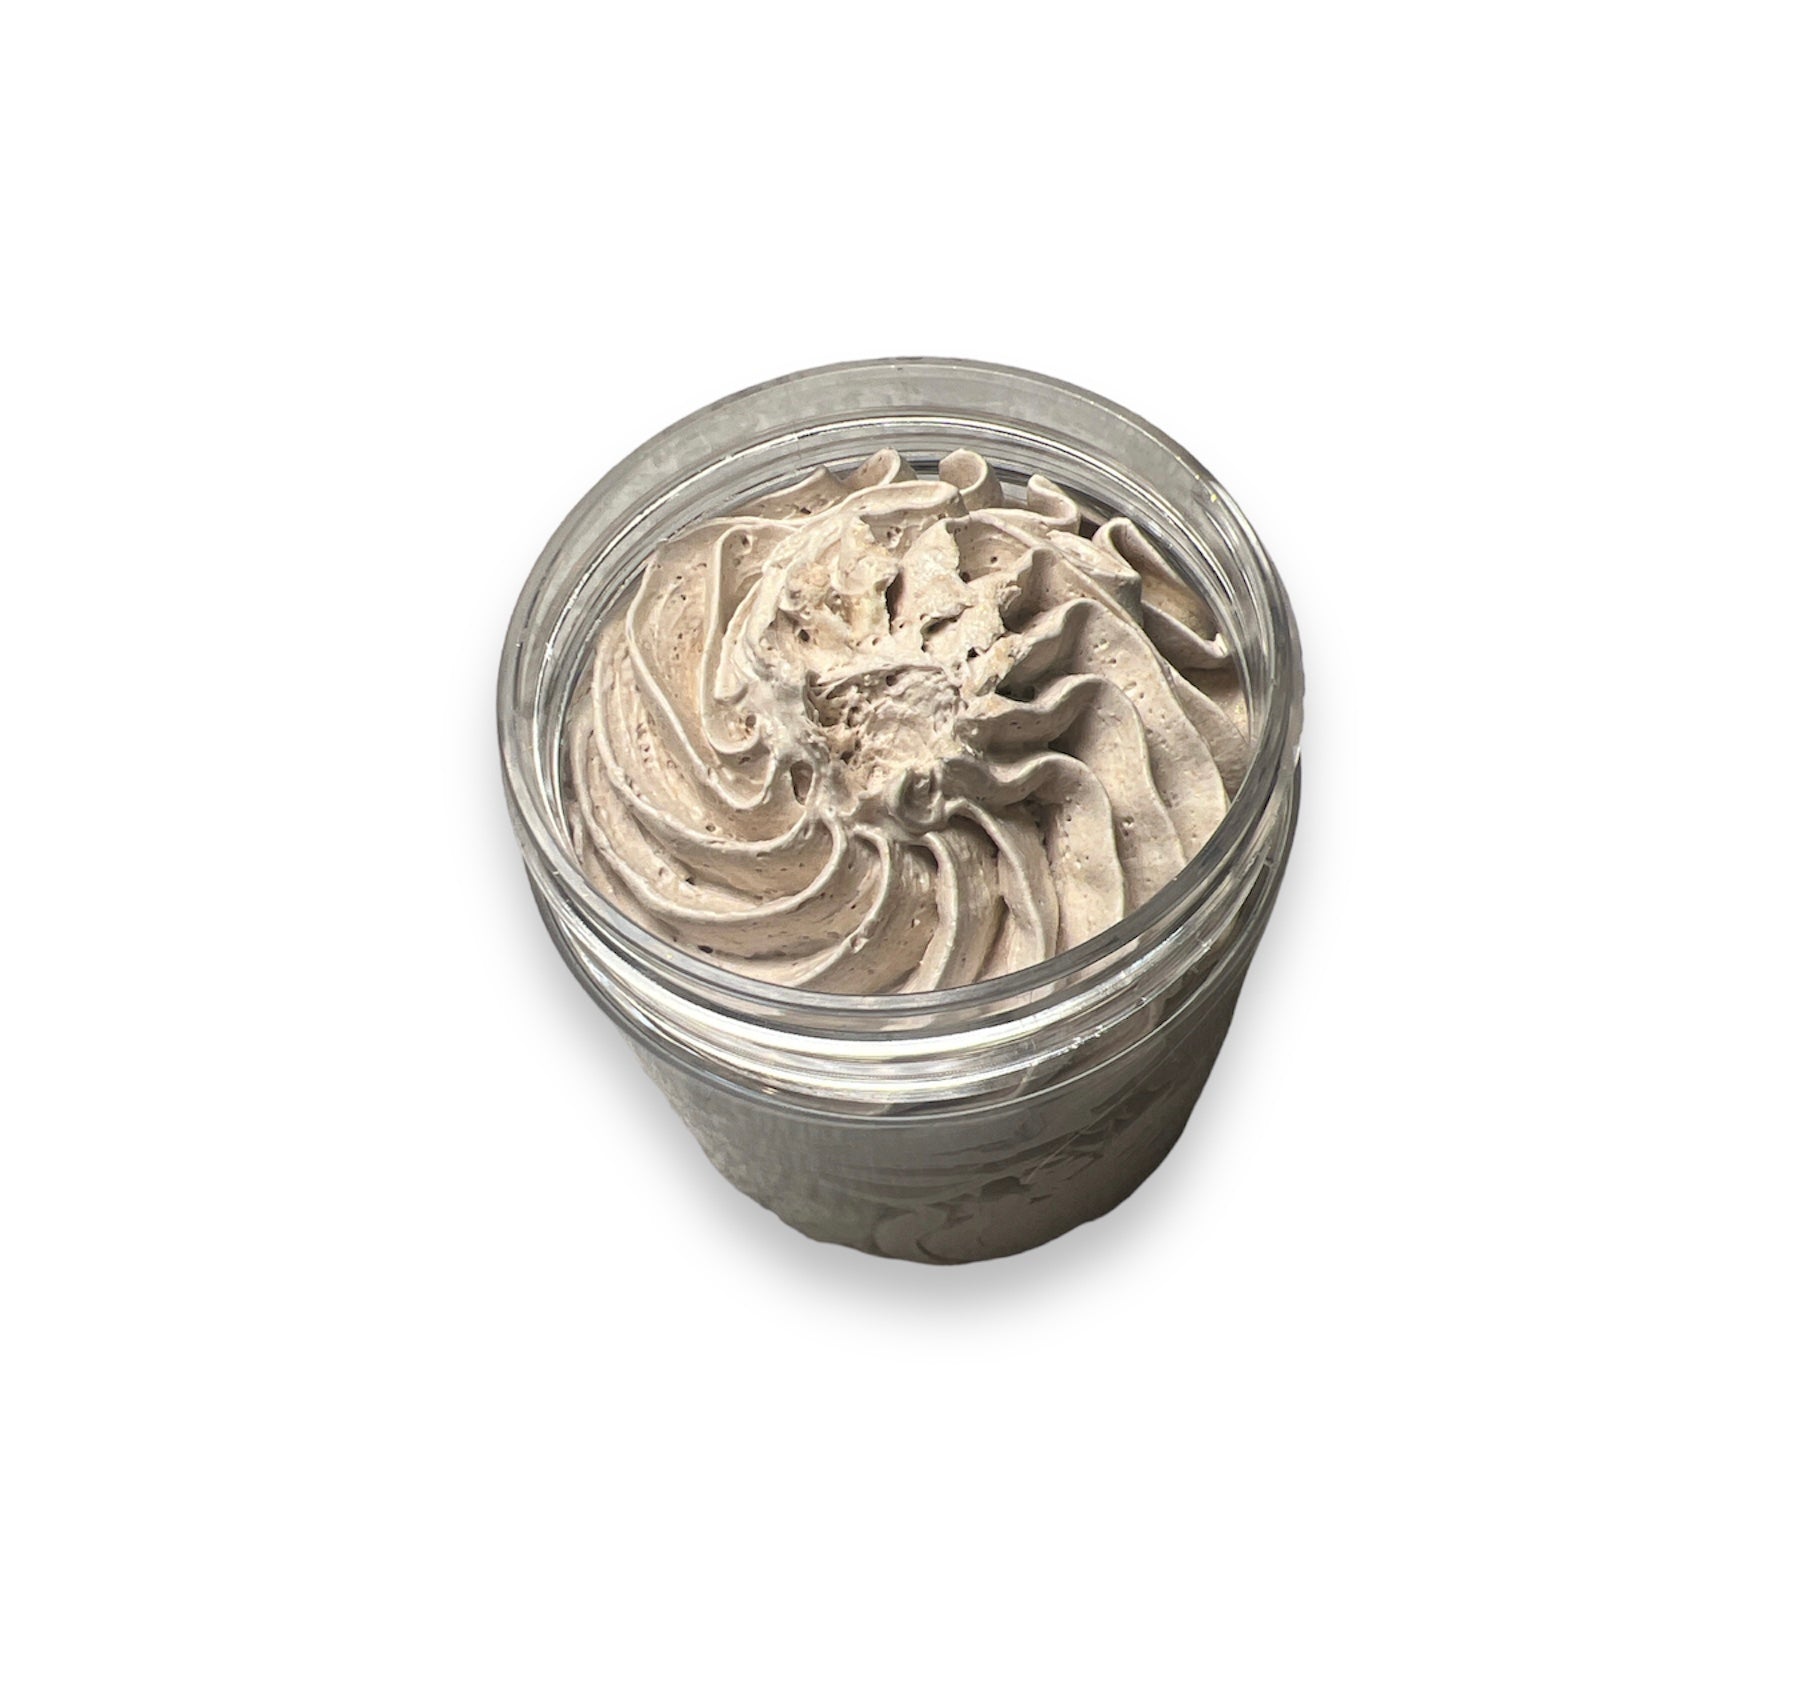 SWEET LIKE CHOCOLATE BODY BUTTER - DLA Cosmetics-Skin care products